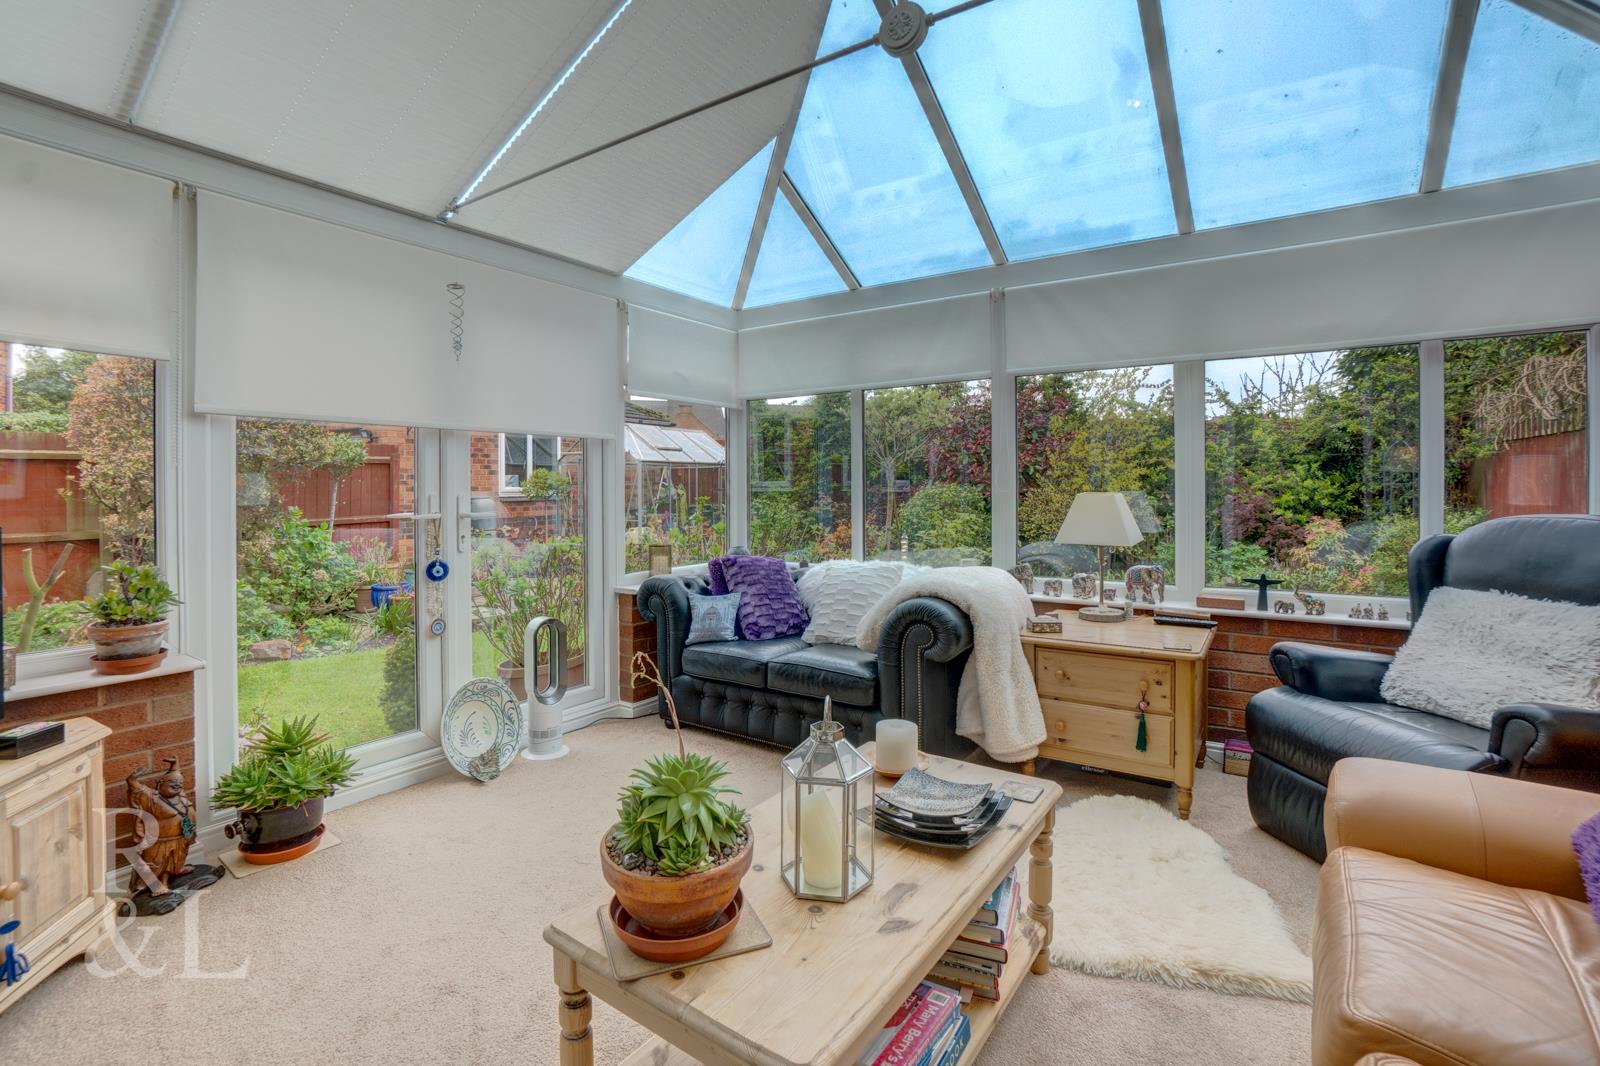 Property image for Daisy Lane, Overseal